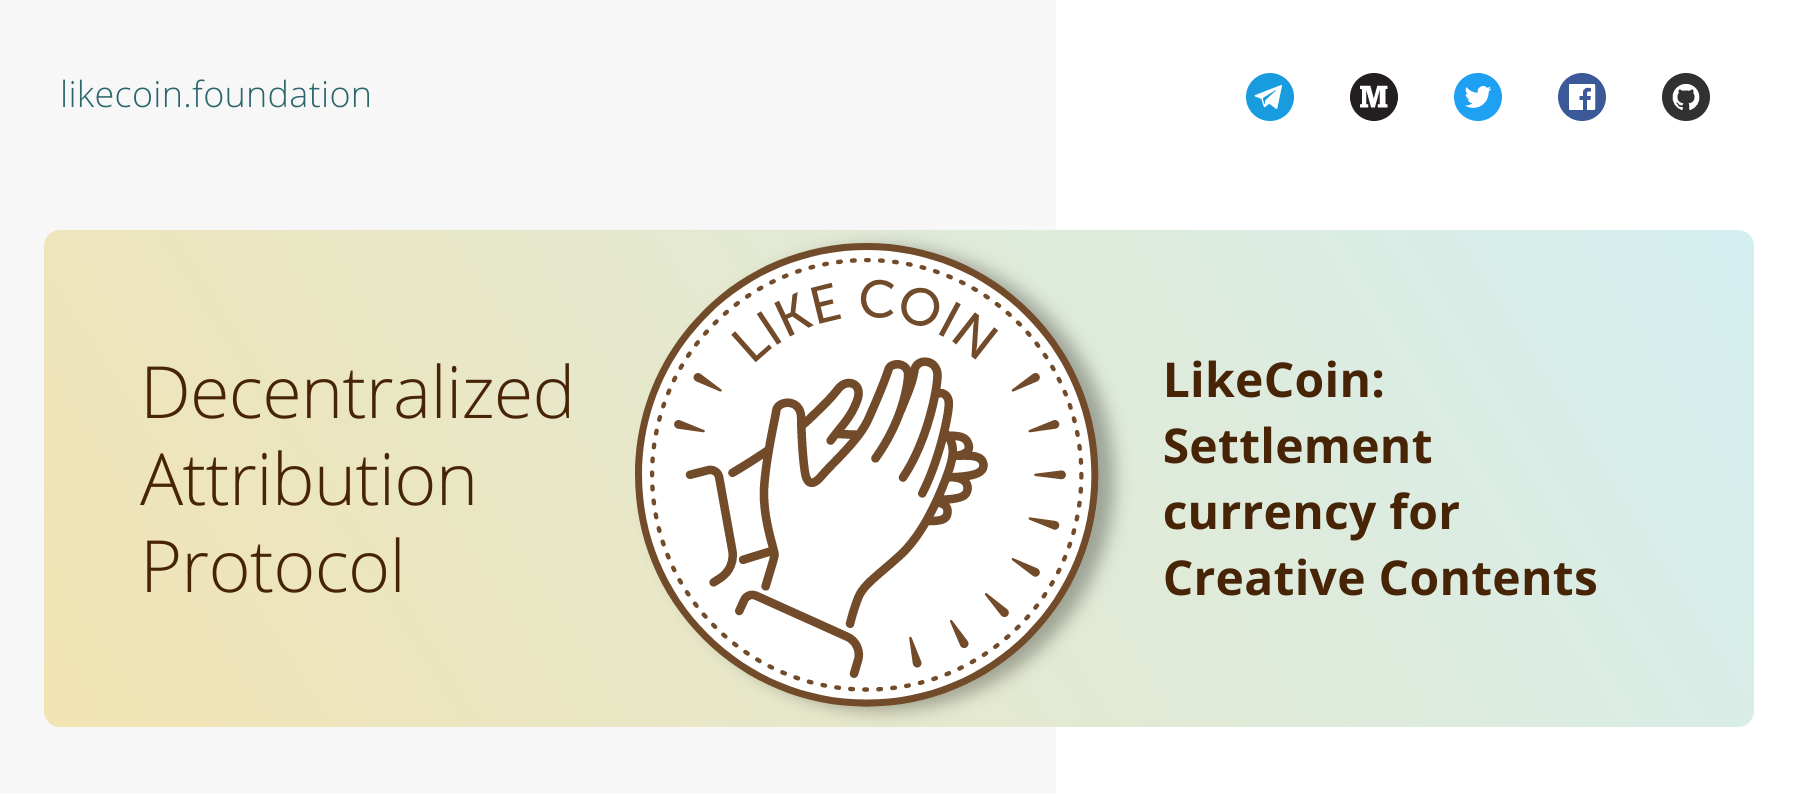 LikeCoin-foundation.png